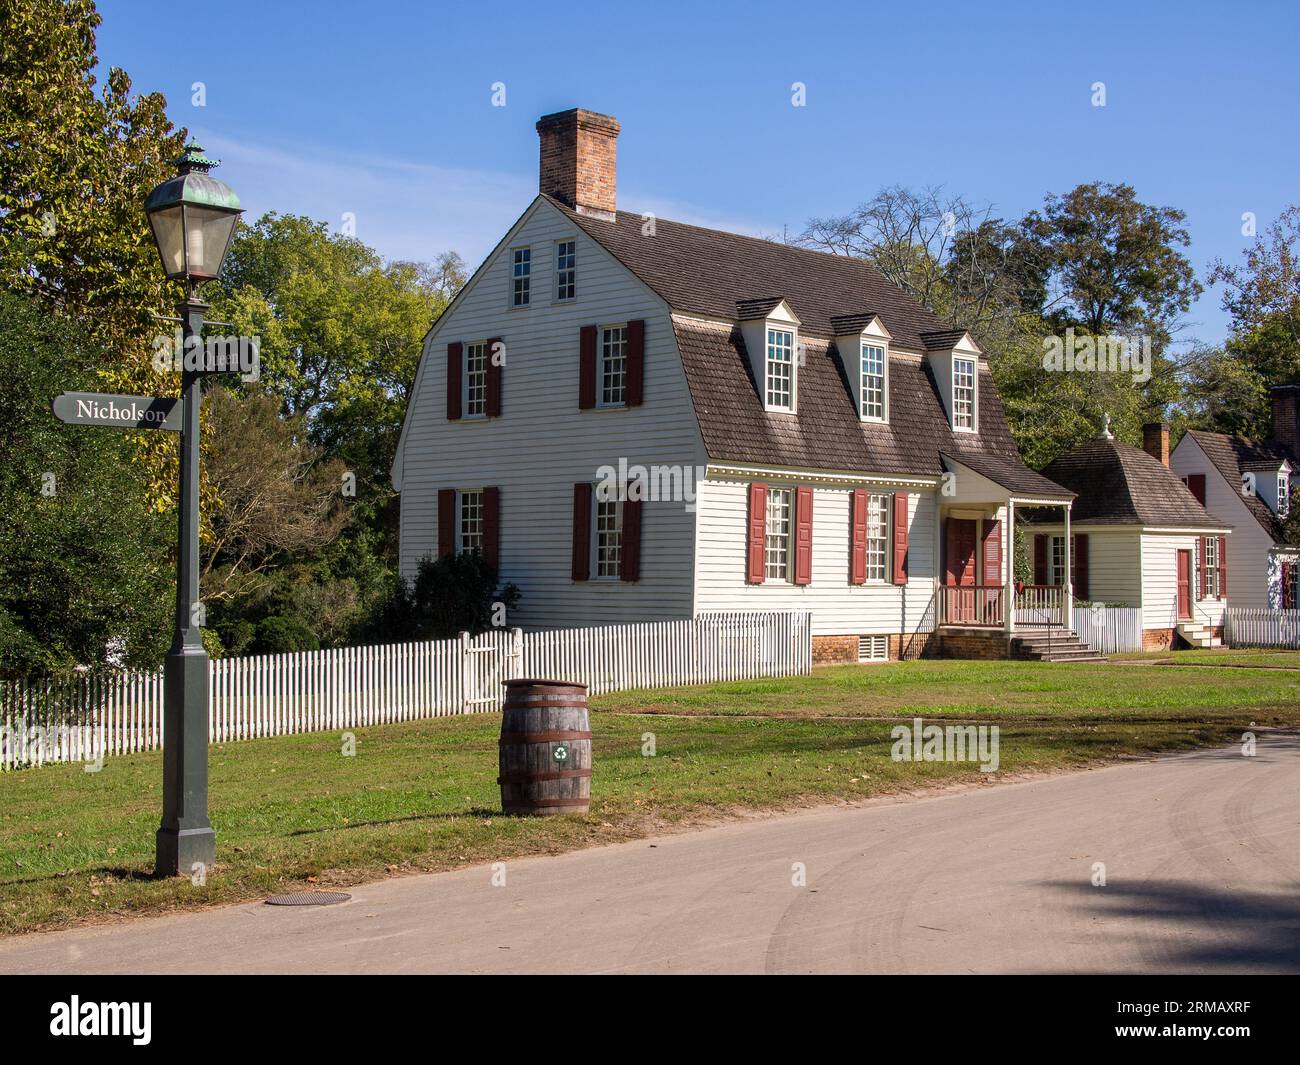 Elegant white colonial home, dual-story design, wooden barrel, charming white fence, street signs, vintage lamp post, set against a vivid blue sky in Stock Photo